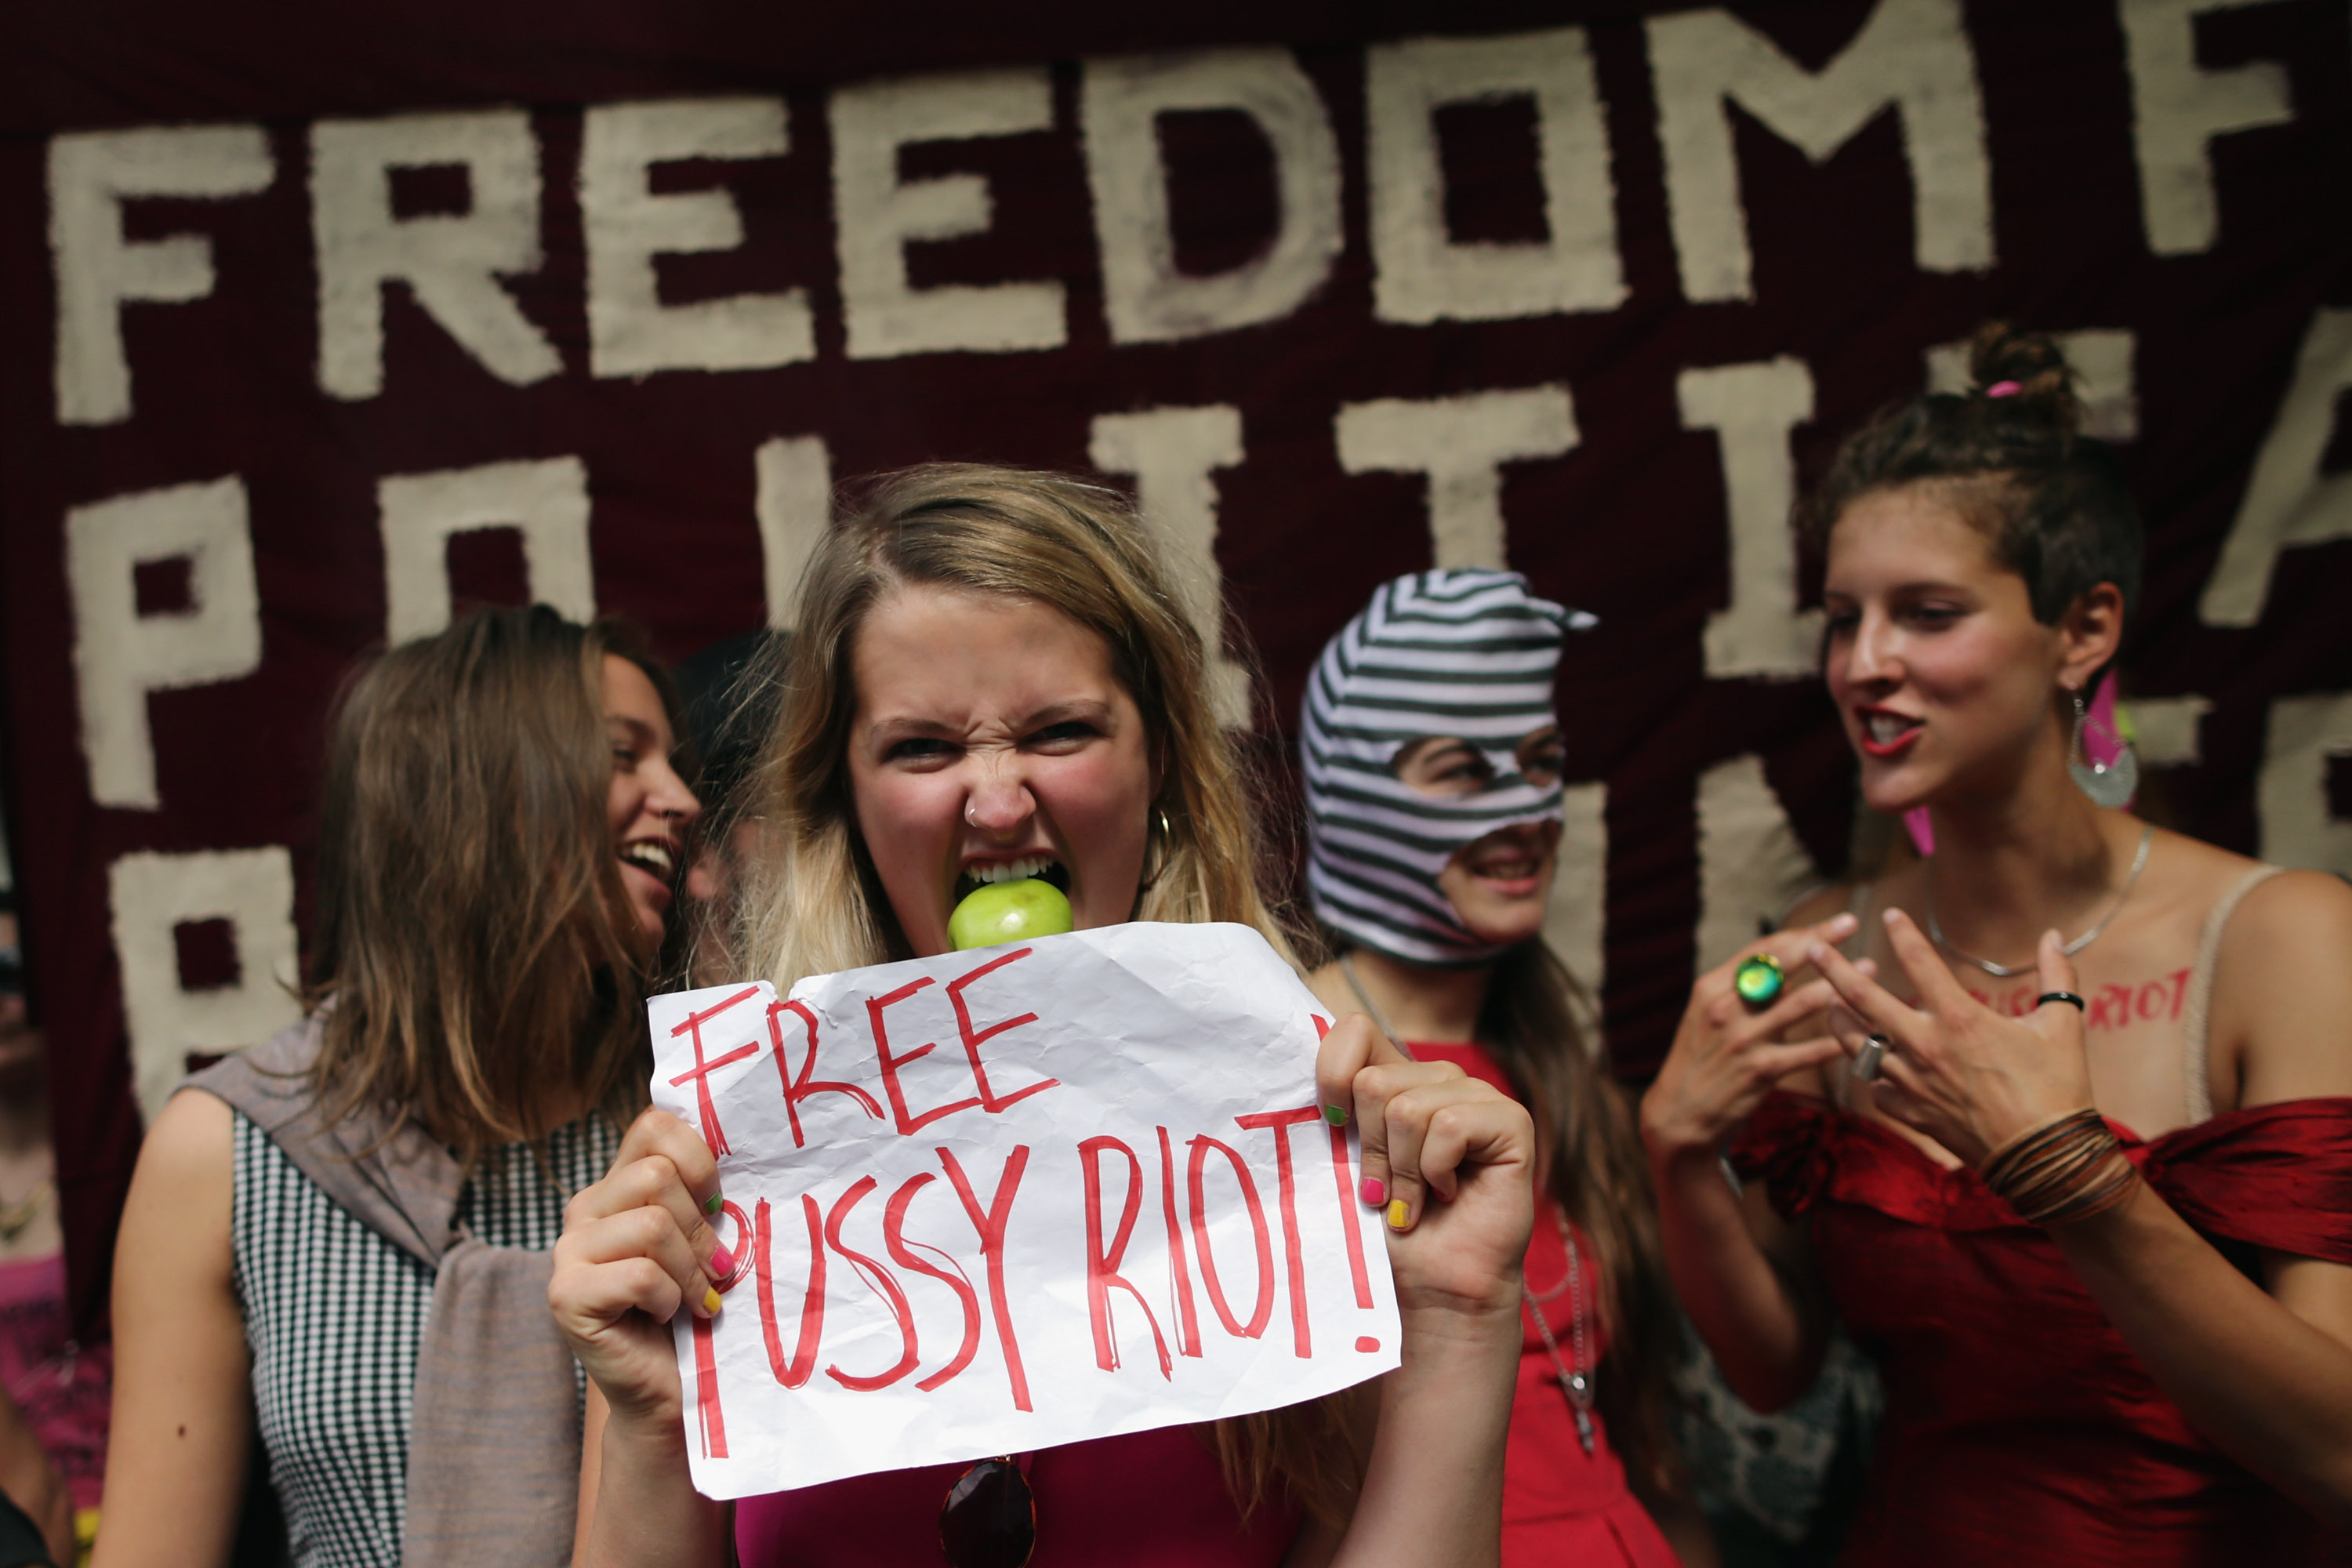 Member Of Russian Punk Band Pussy Riot Goes On Hunger Strike To Protest Slave Treatment Of